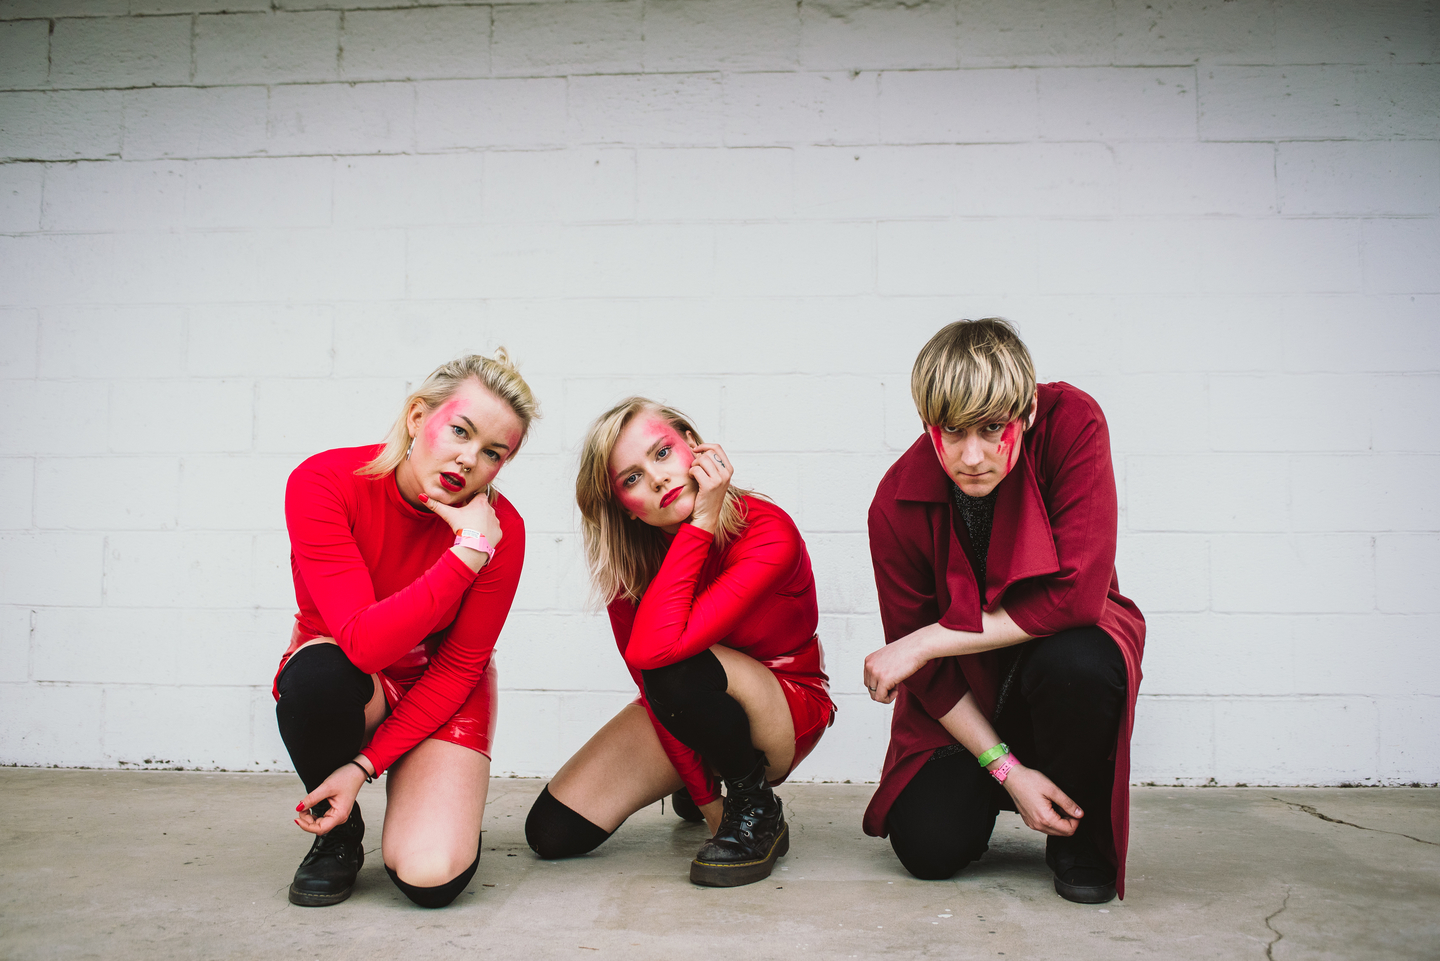 The Magnettes came all the way from Pajala, Sweden to perform at SXSW. Photo by Letitia Smith